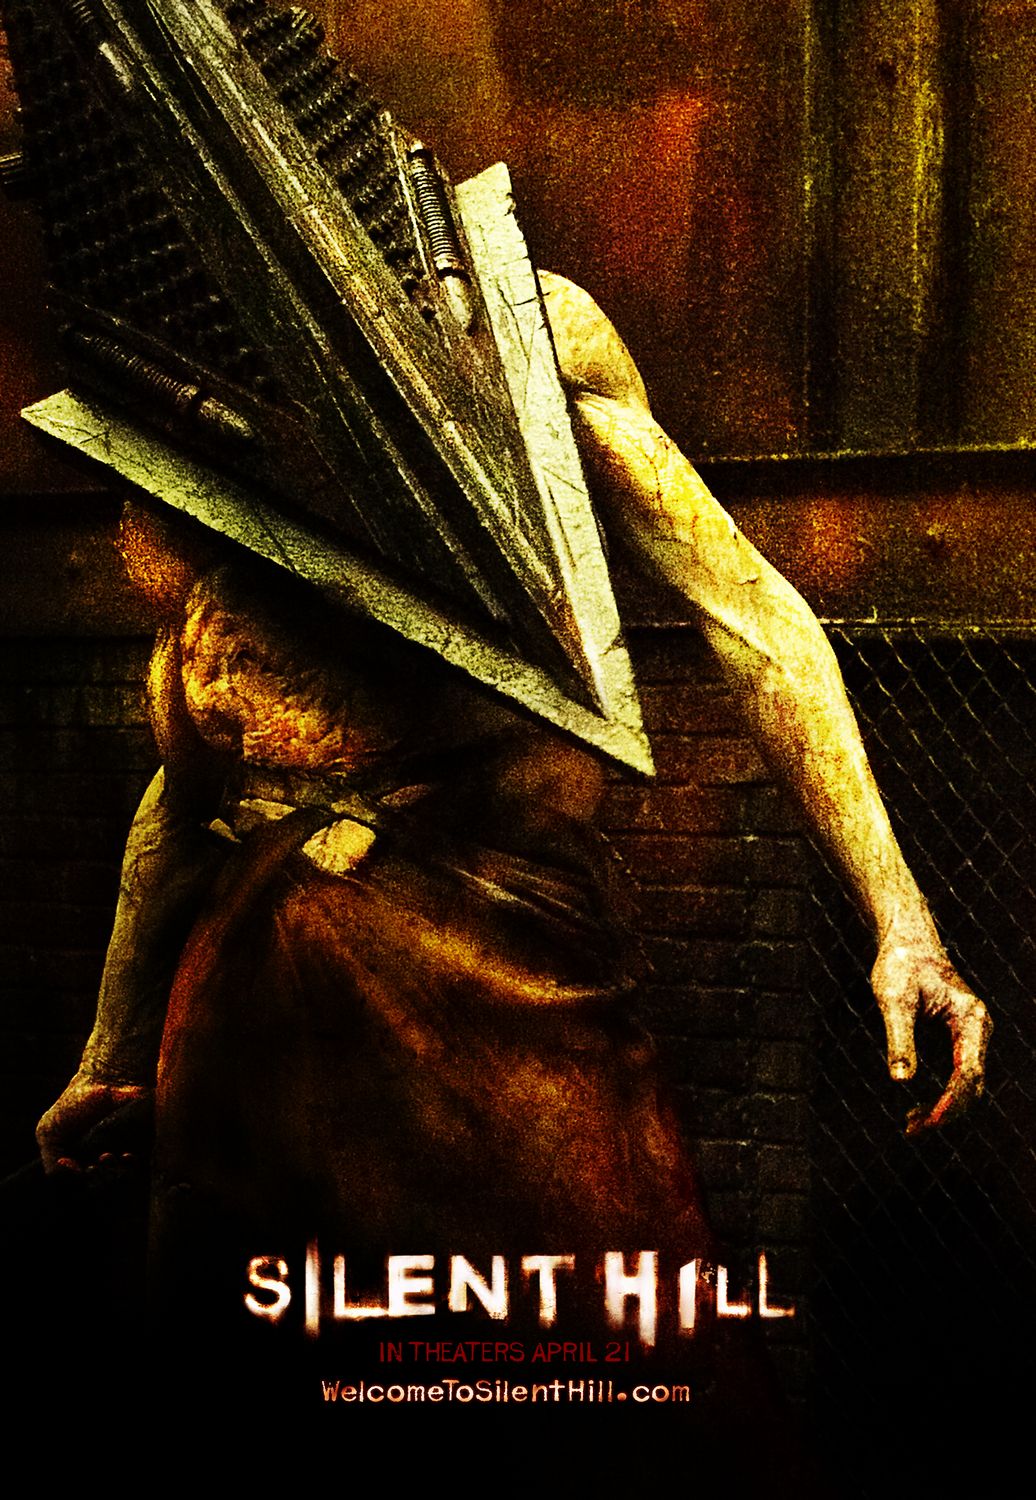 Extra Large Movie Poster Image for Silent Hill (#5 of 11)